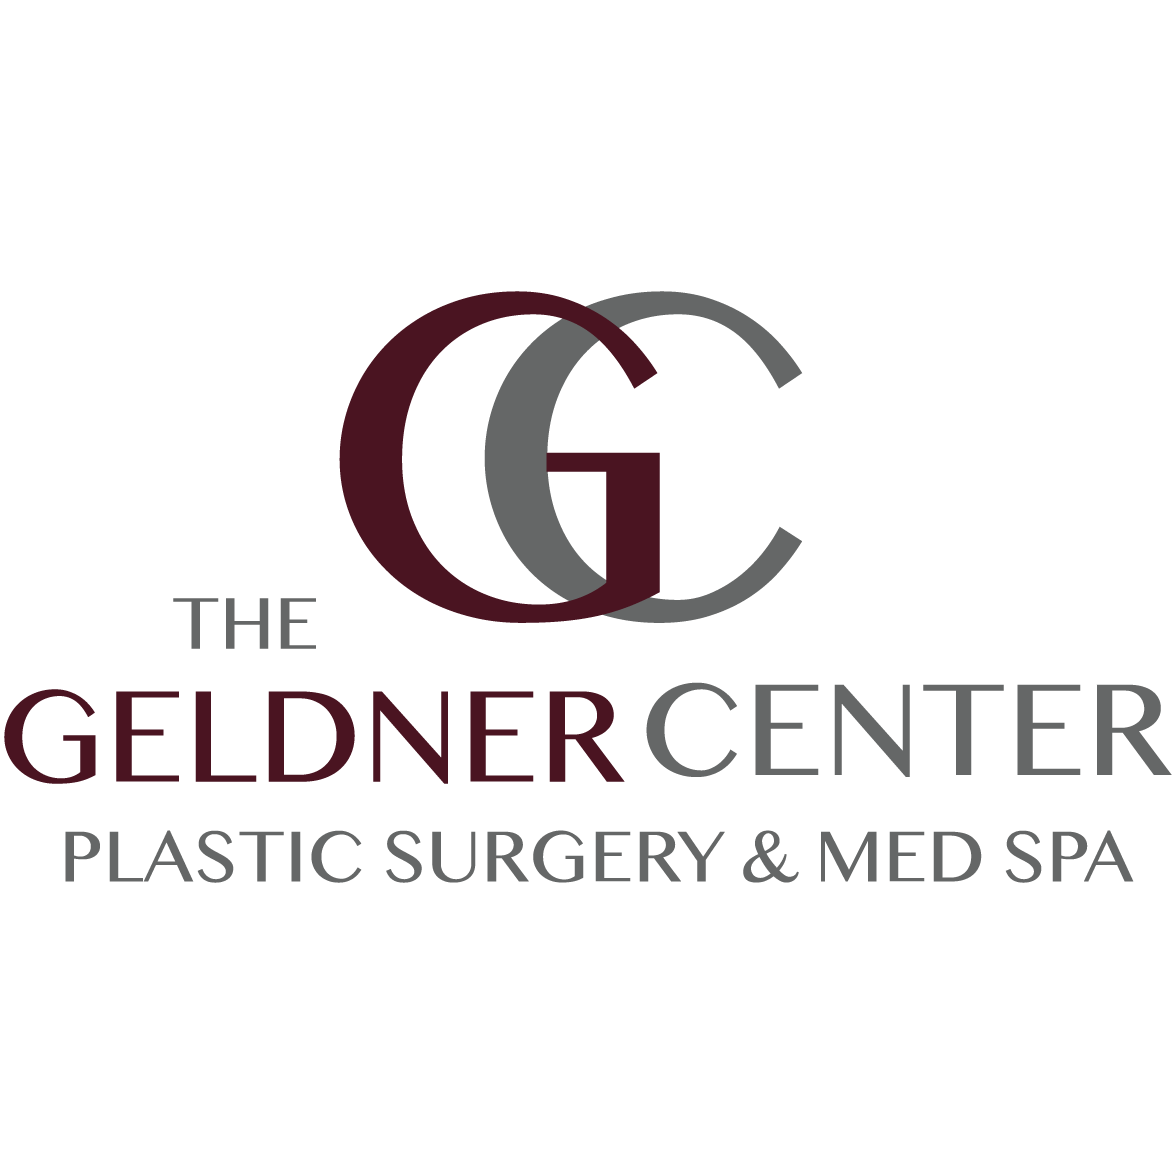 The Geldner Center Plastic Surgery and Med Spa - Chicago, IL 60611 - (312)981-4440 | ShowMeLocal.com